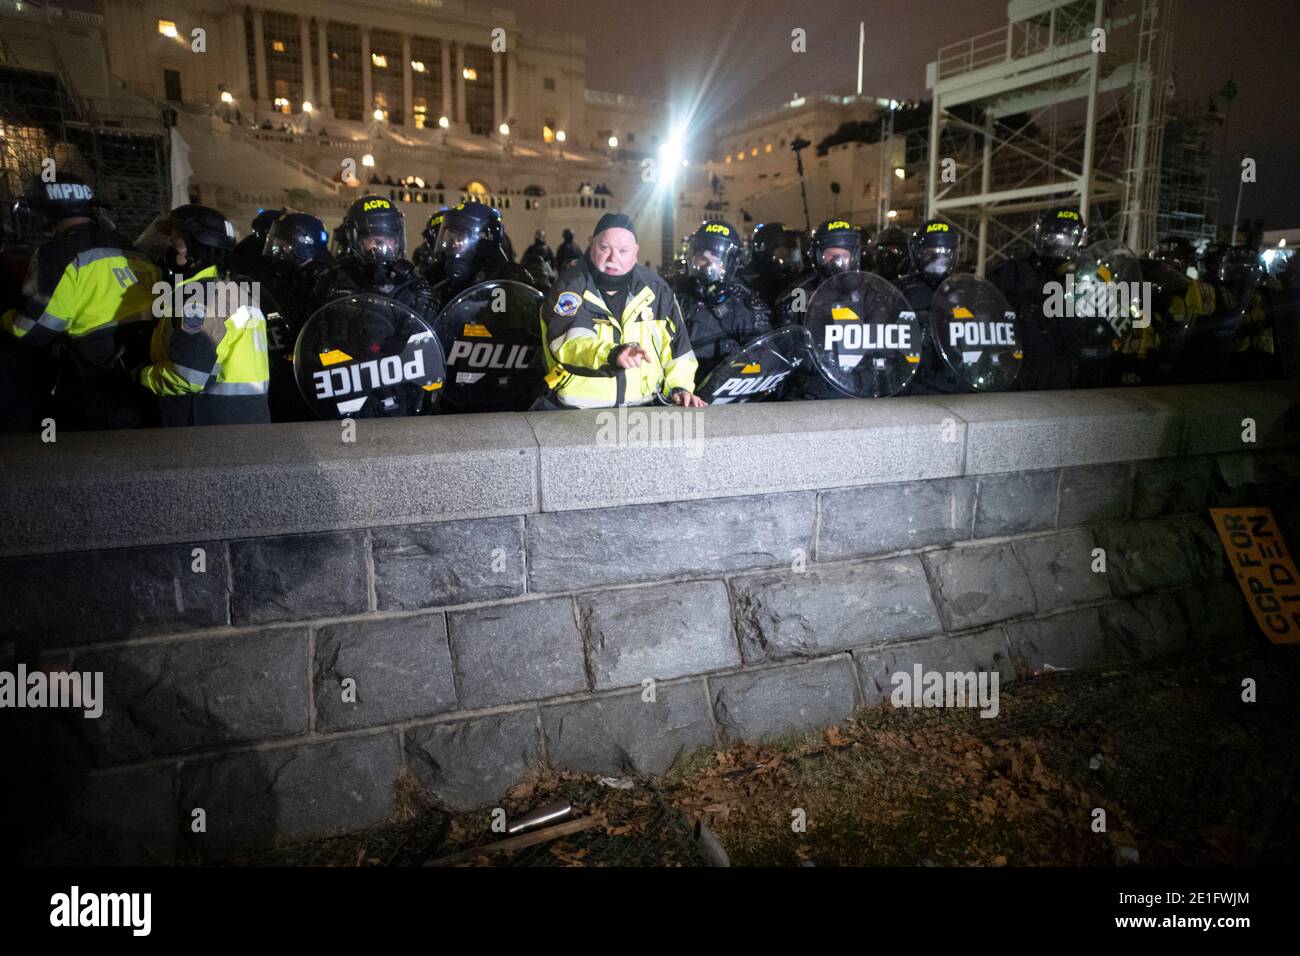 January 6, 2021: DC Metro Police as well as other Law Enforcement are shown on the U.S. Capitol grounds after rioters clash against the U.S. Capitol Police and stormed The Capitol during a march and protest in Washington, DC Credit: Brian Branch Price/ZUMA Wire/Alamy Live News Stock Photo